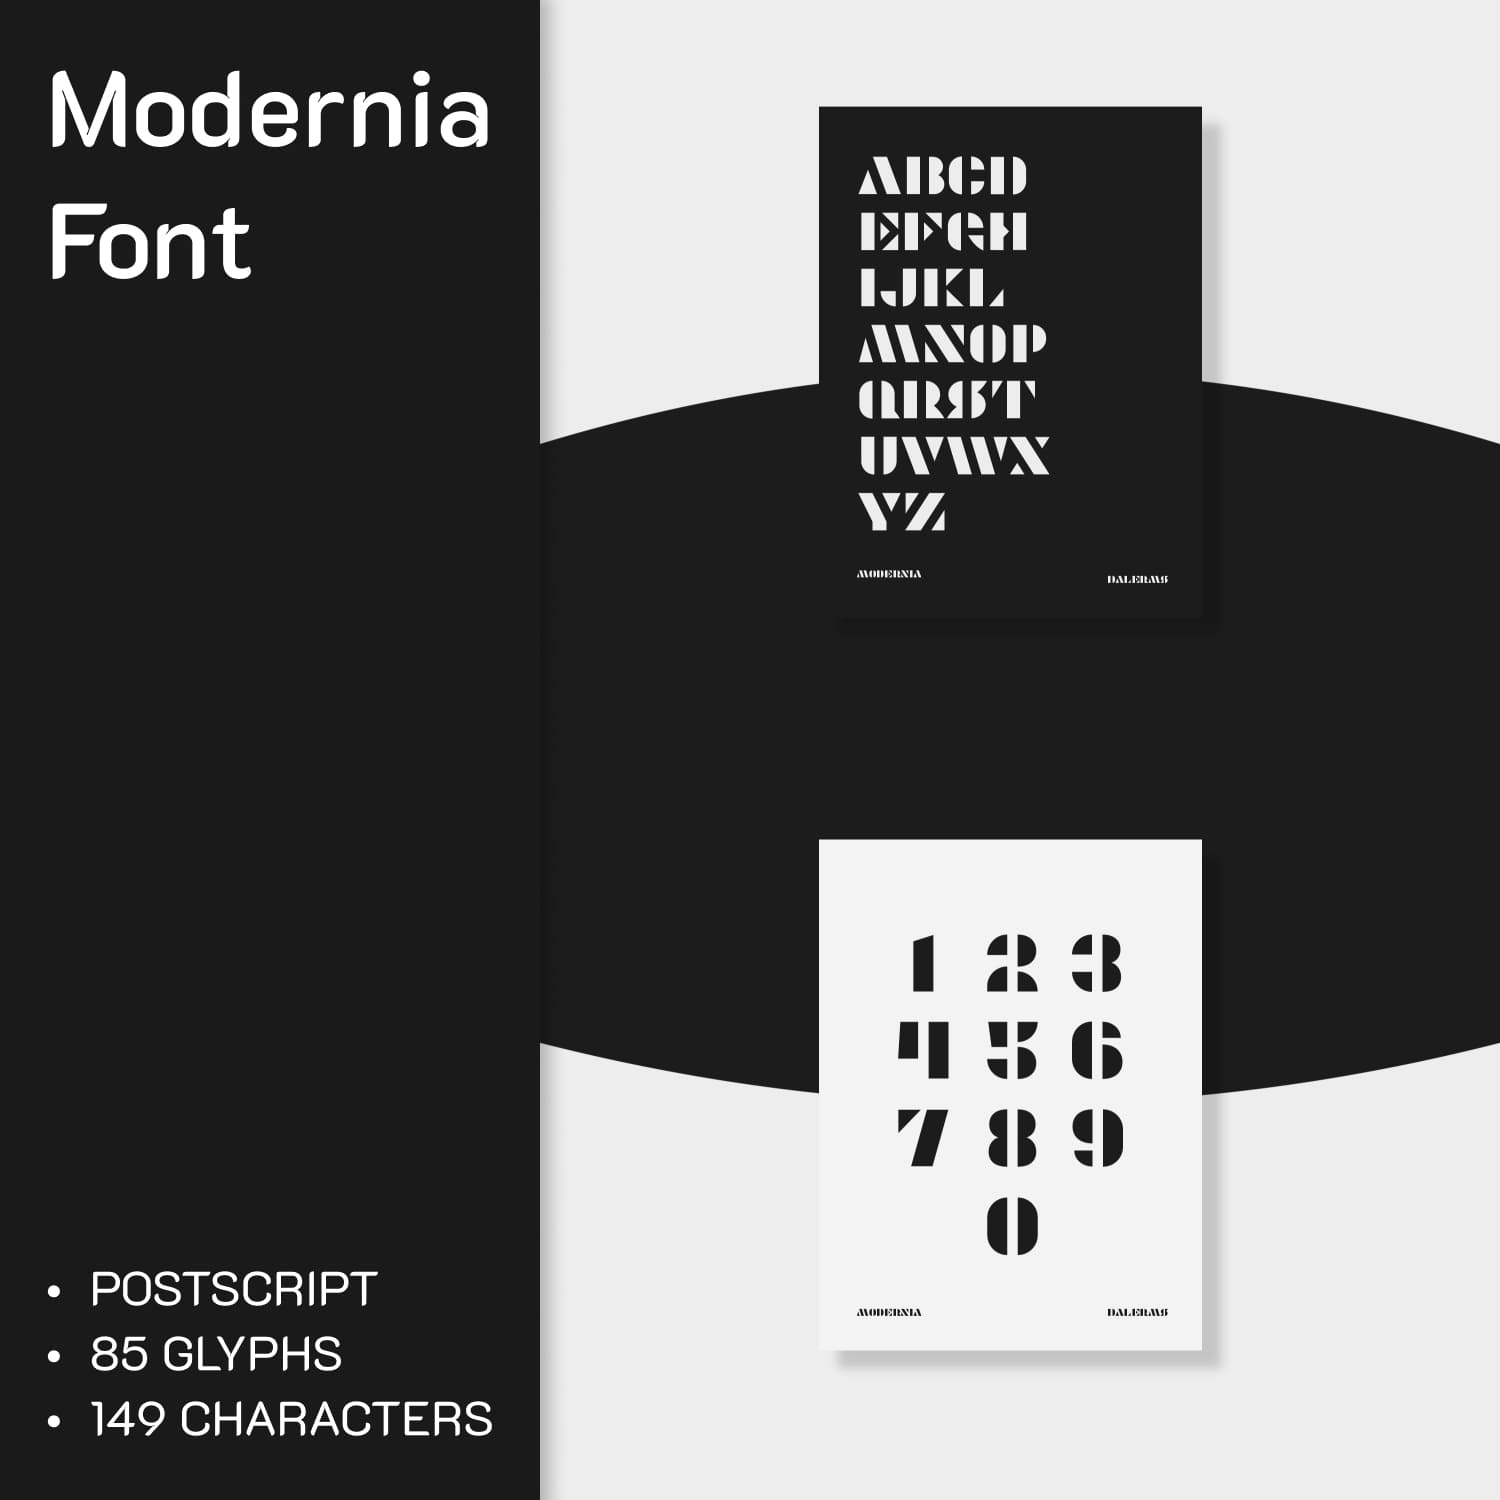 Modernia Font - main image preview.